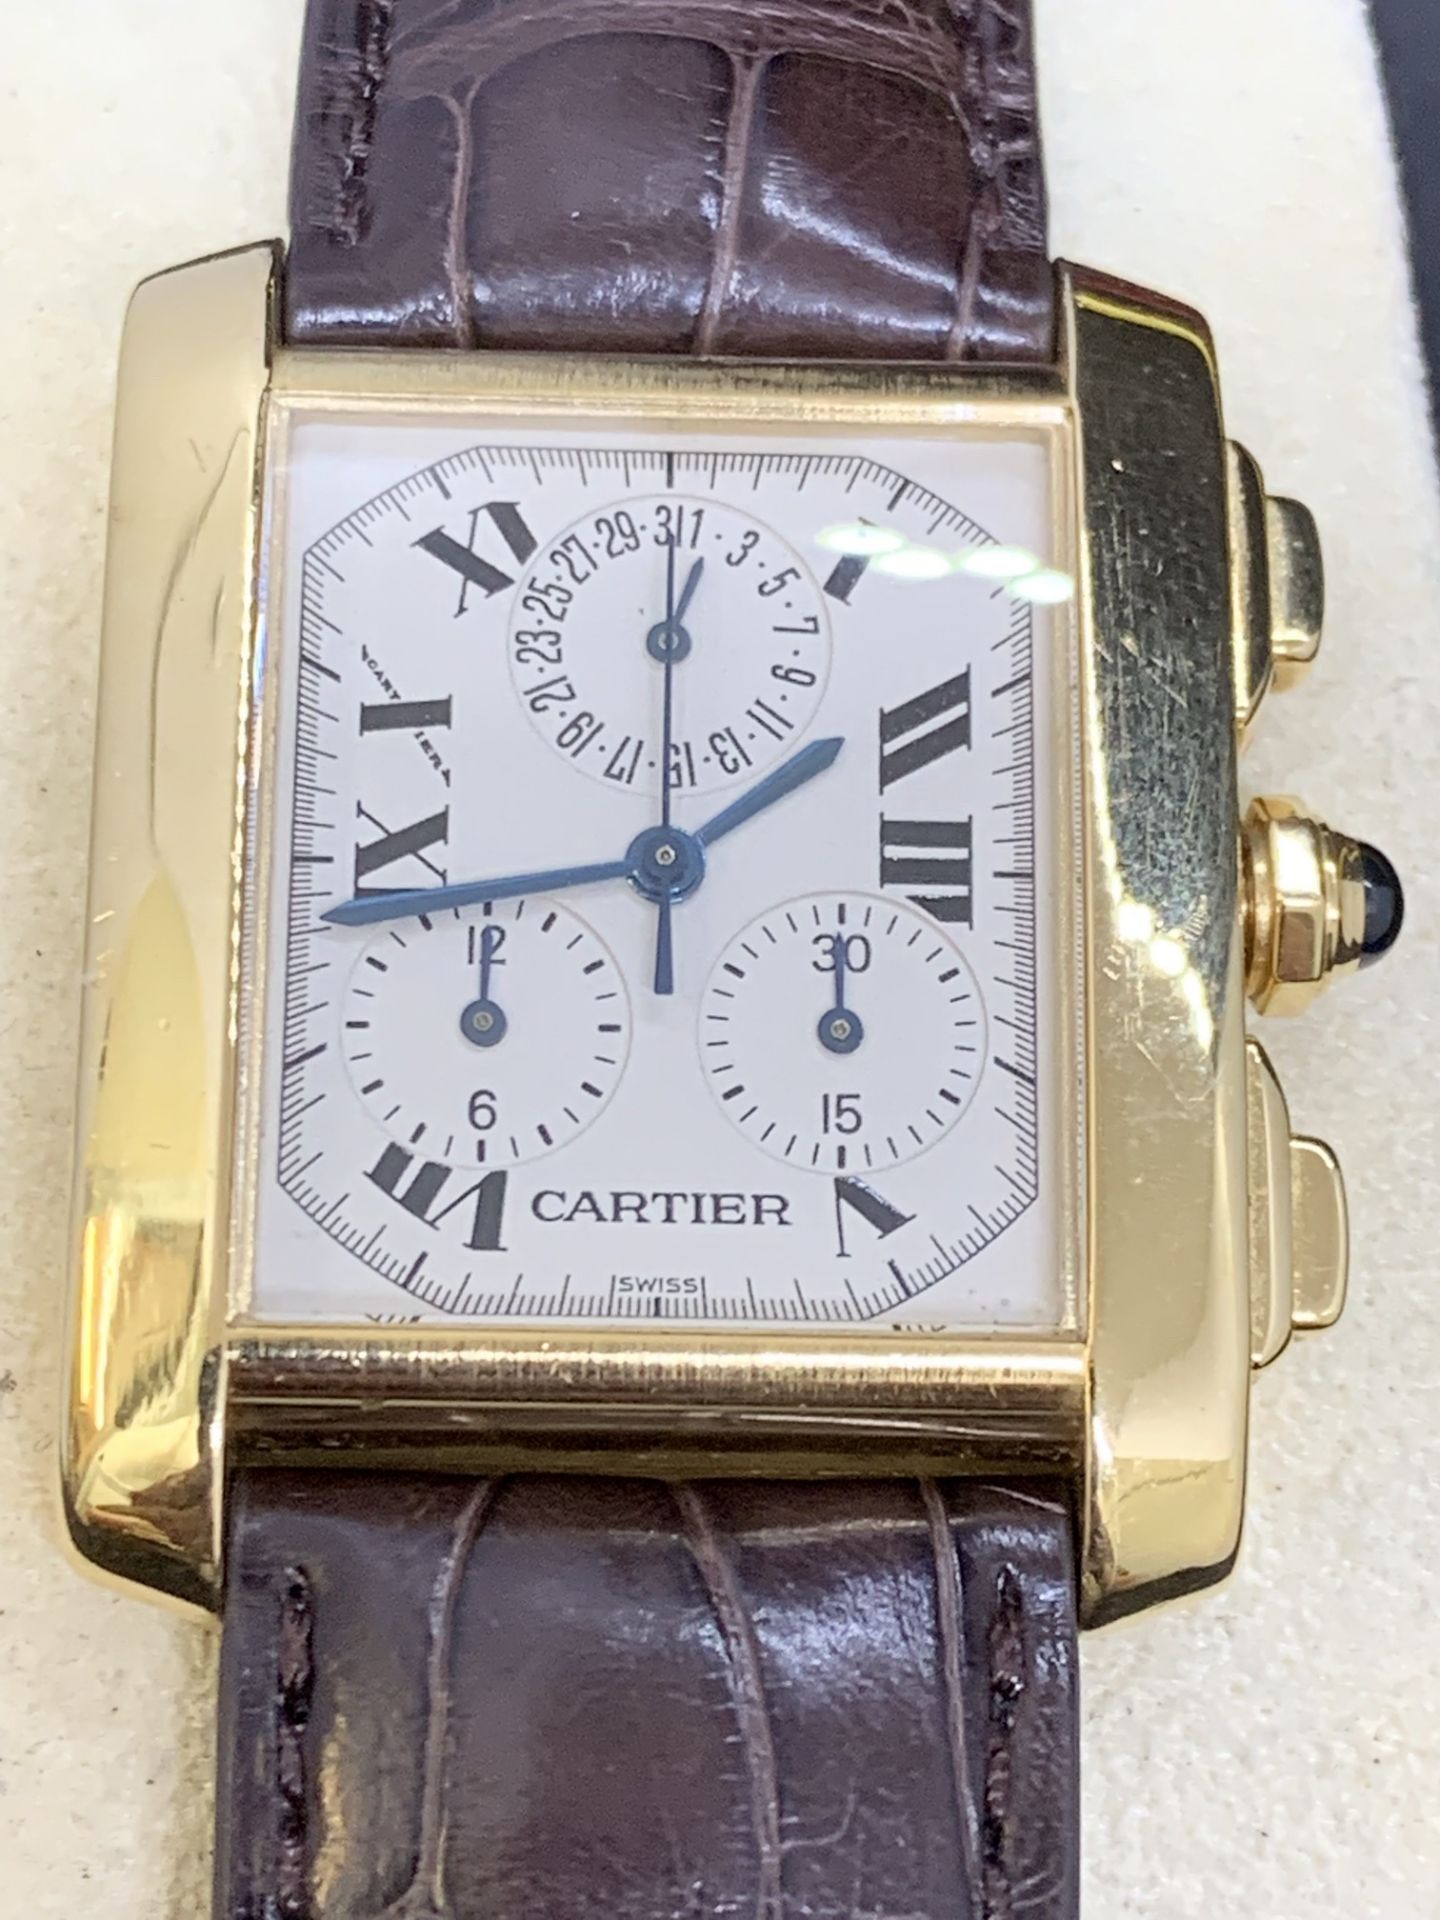 CARTIER 18ct GOLD CHRONOGRAPH WATCH